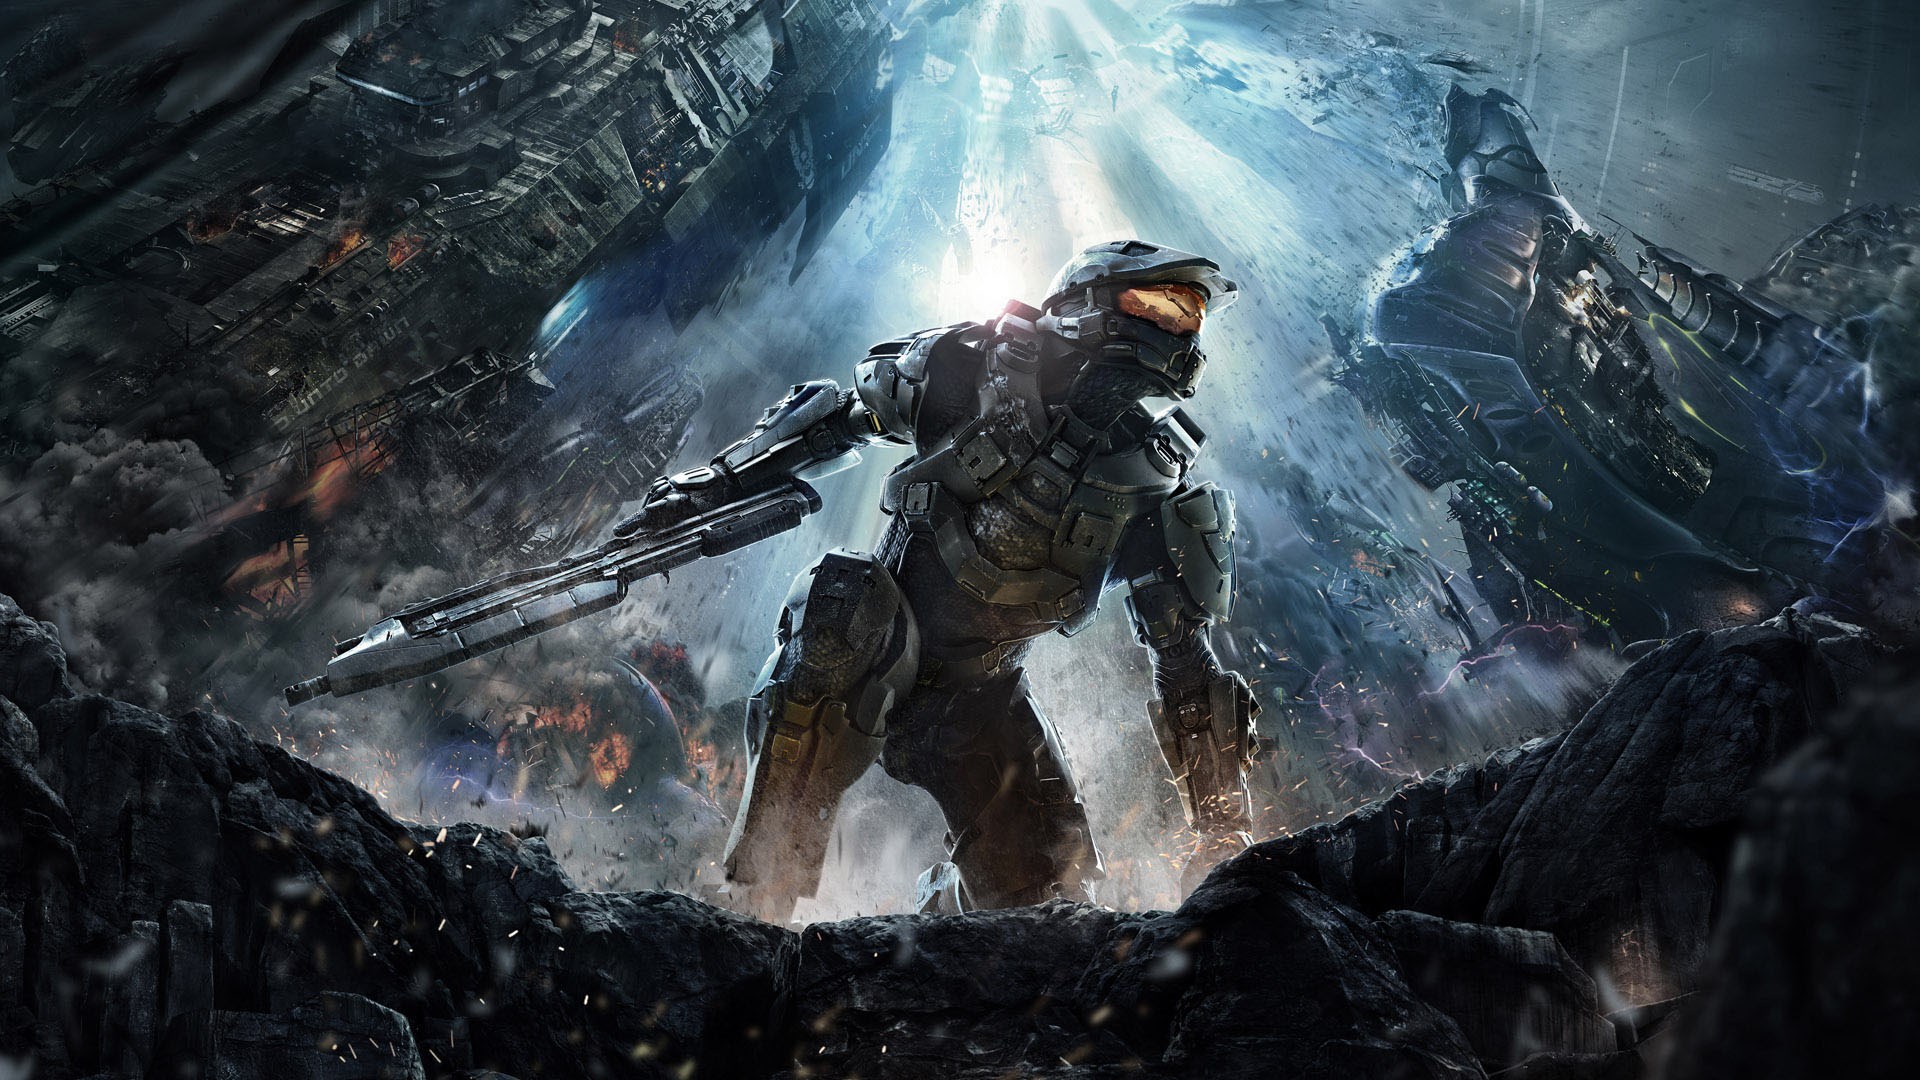 overhyped video games - Halo 4 video game screenshot